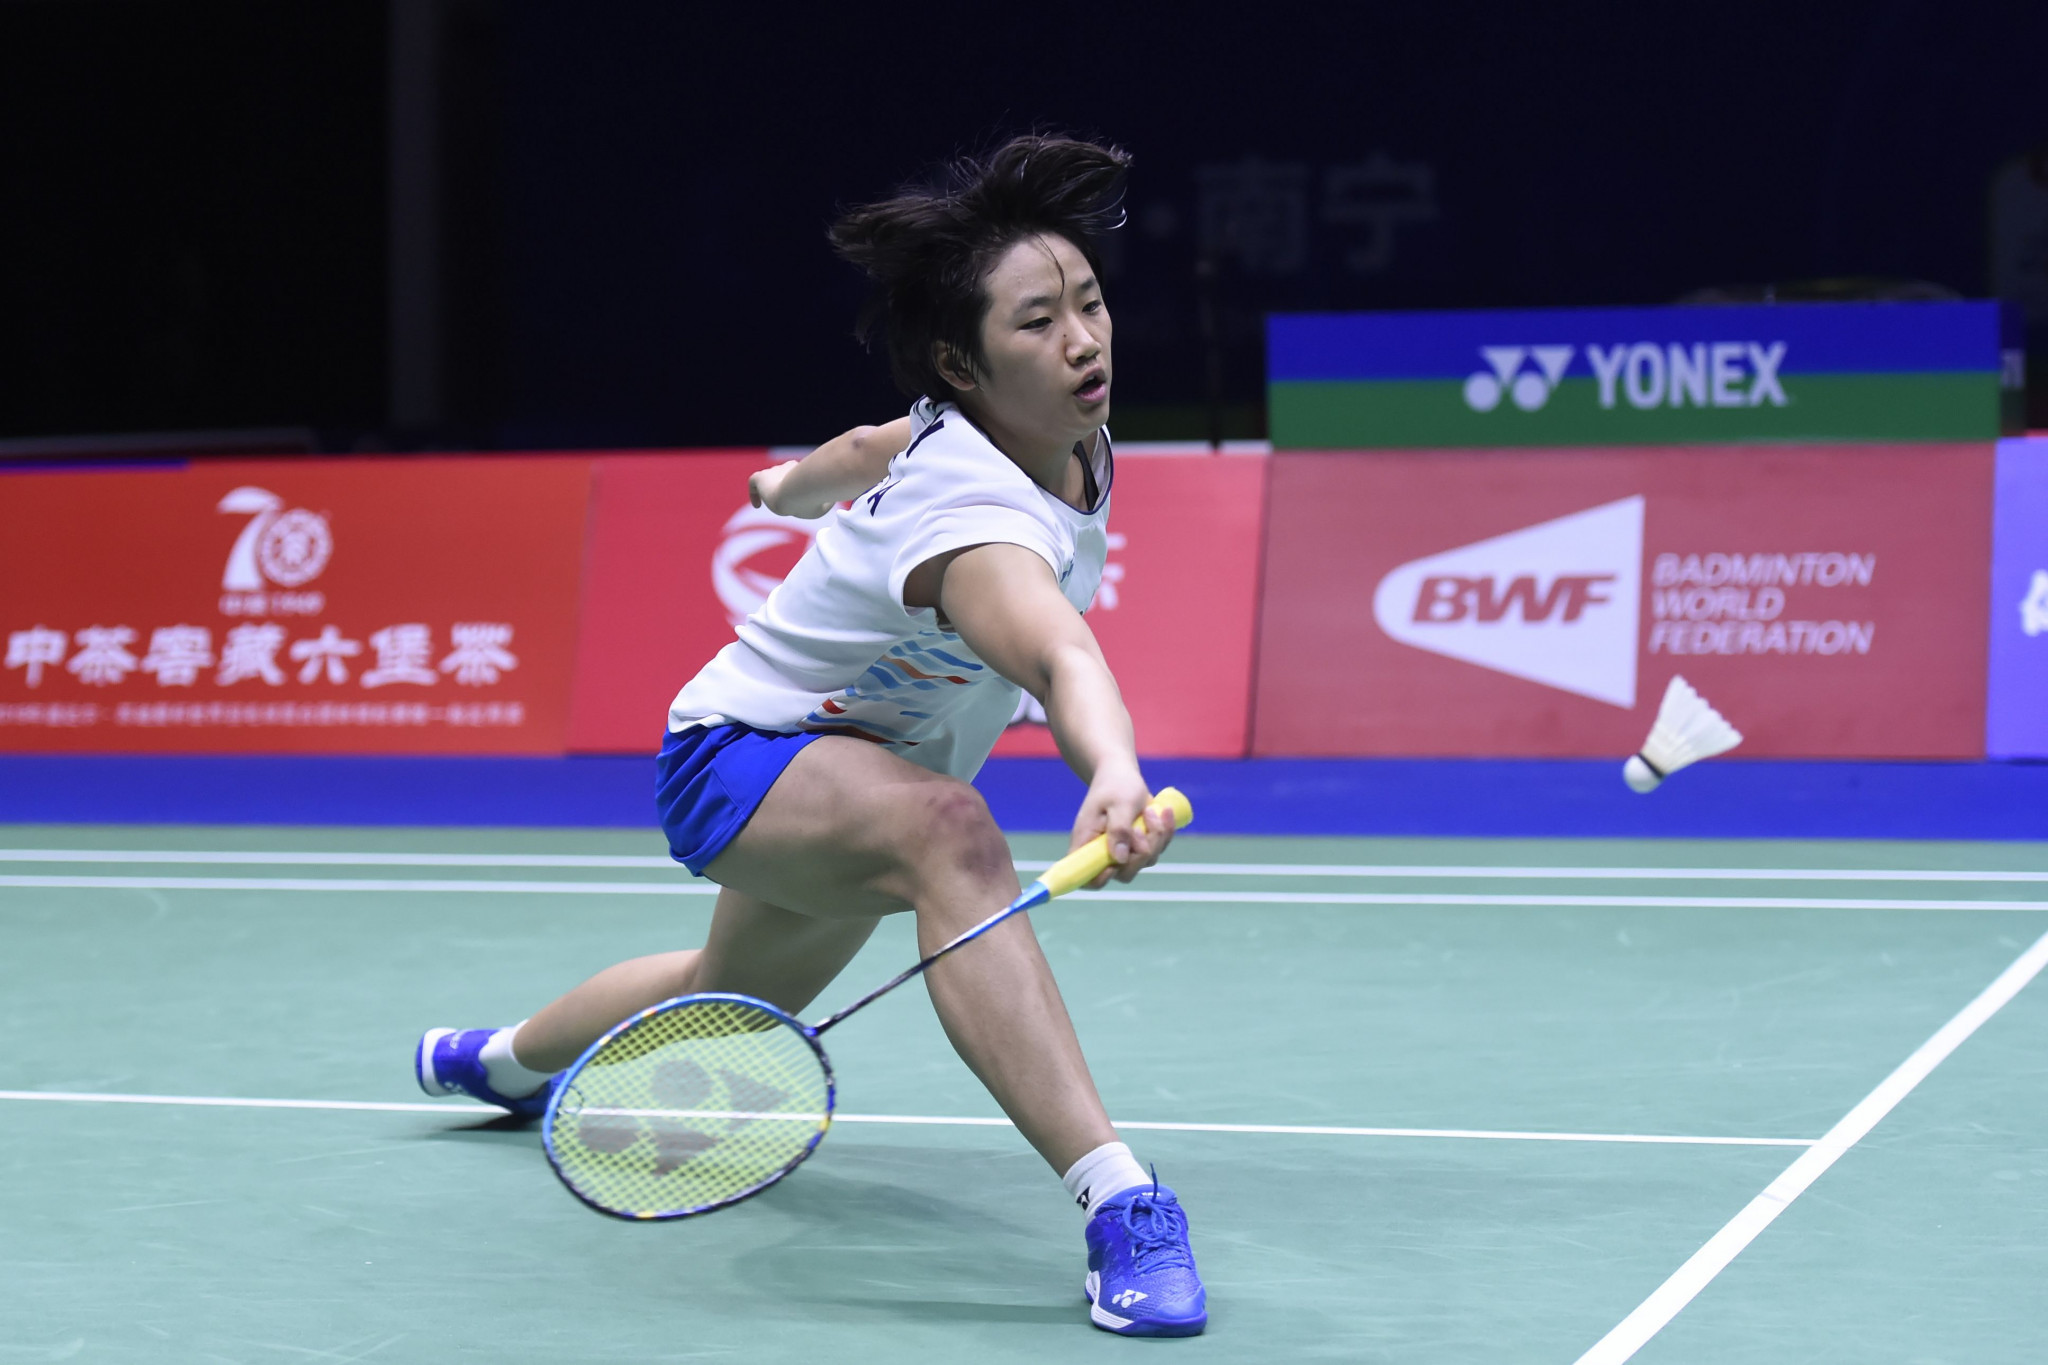 Teenage star An beats Olympic champion Marín to clinch BWF French Open title